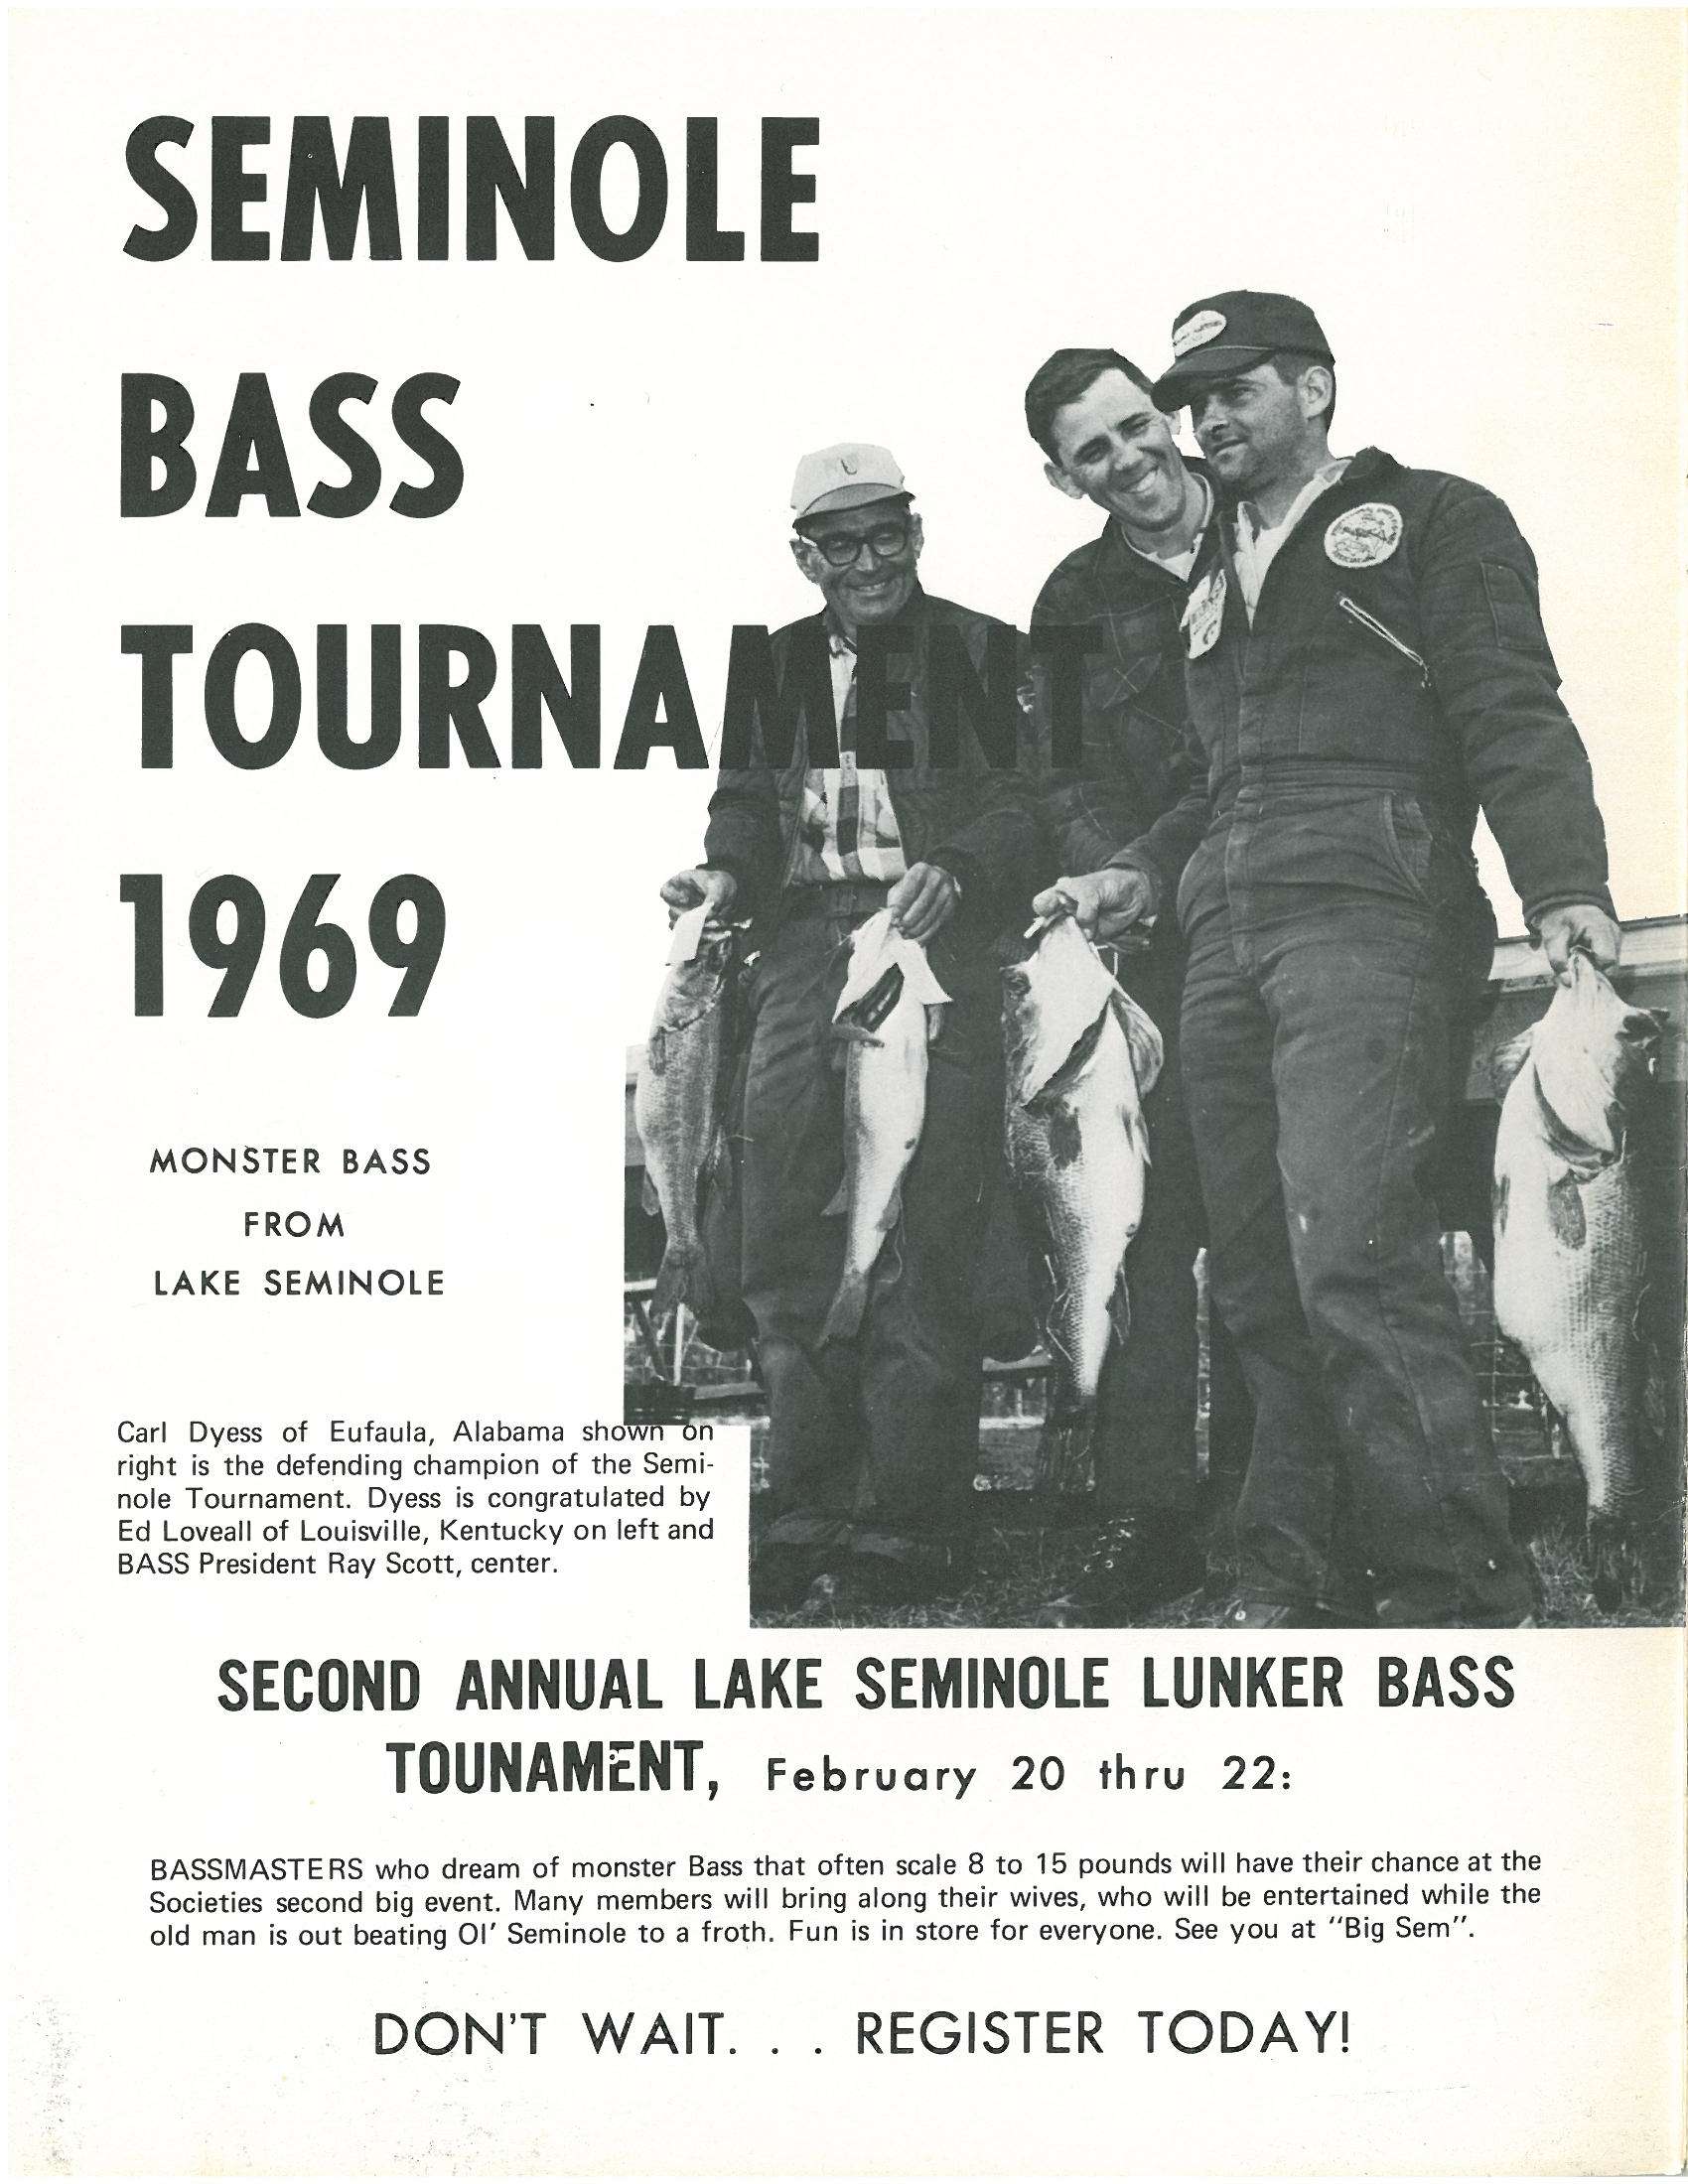 Inside the front cover, an ad for the 1969 tournament includes a picture of the first Seminole event champion, Carl Dyess. The winning fish are shown dead as B.A.S.S. did not begin its catch-and-release efforts until 1972.